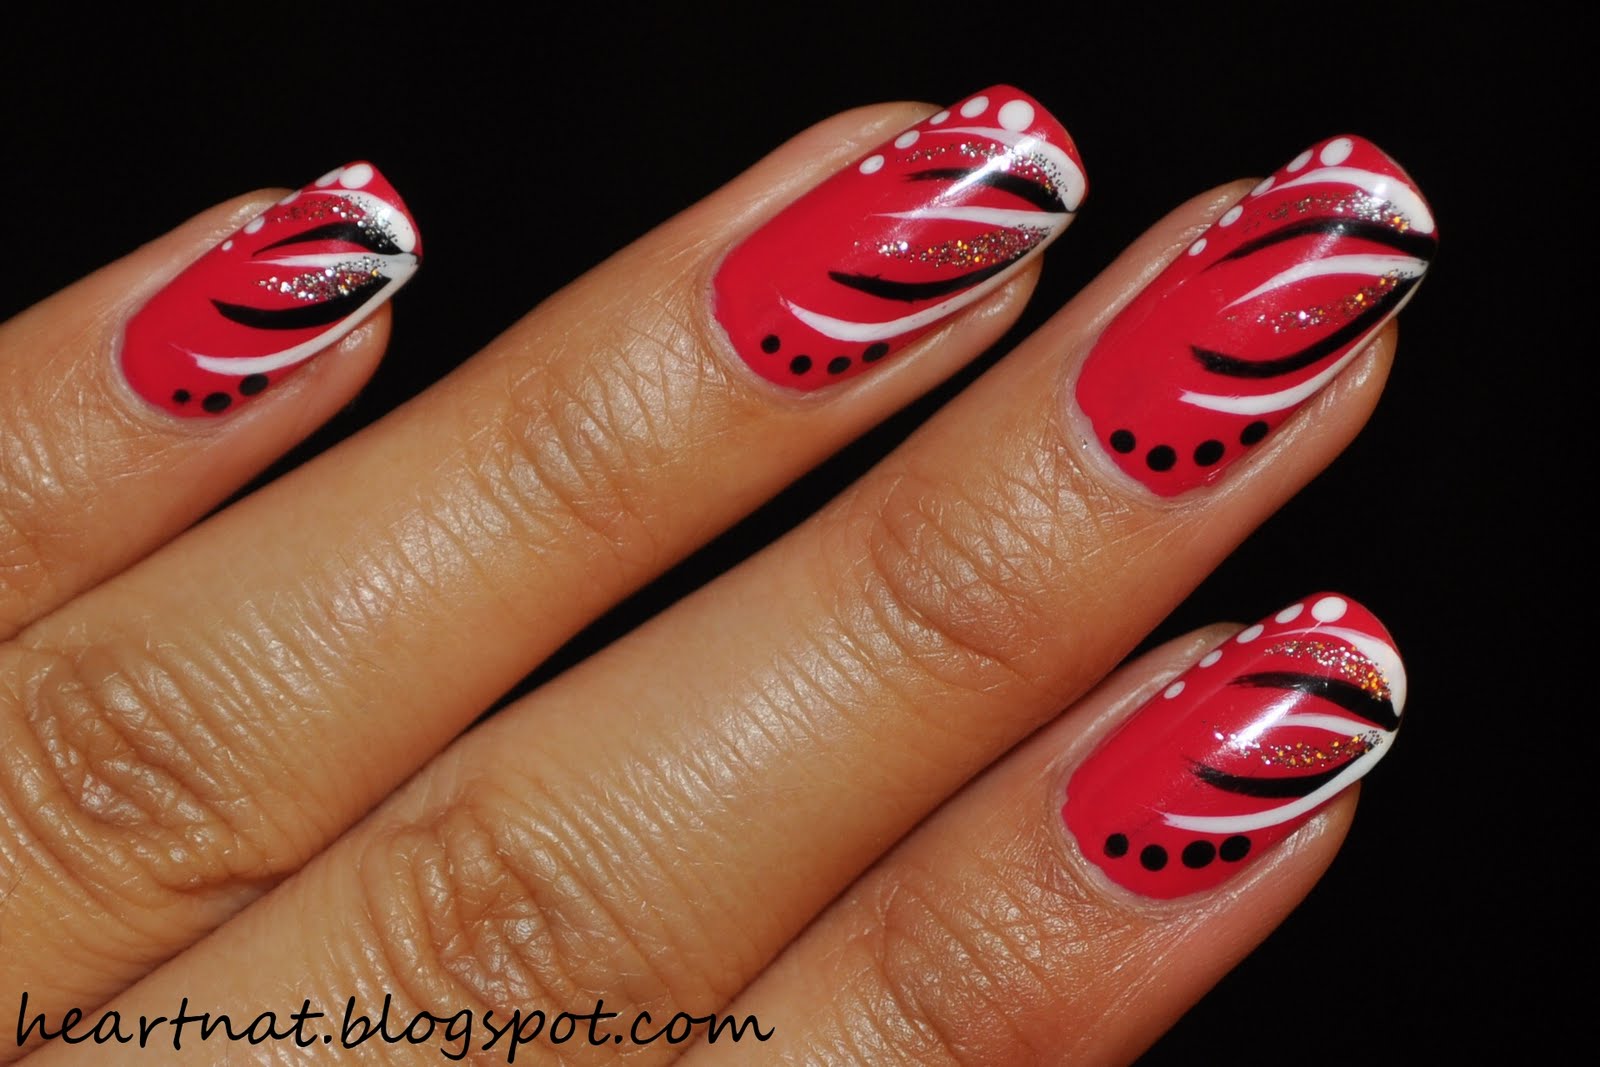 Freehand Nail Art - wide 7